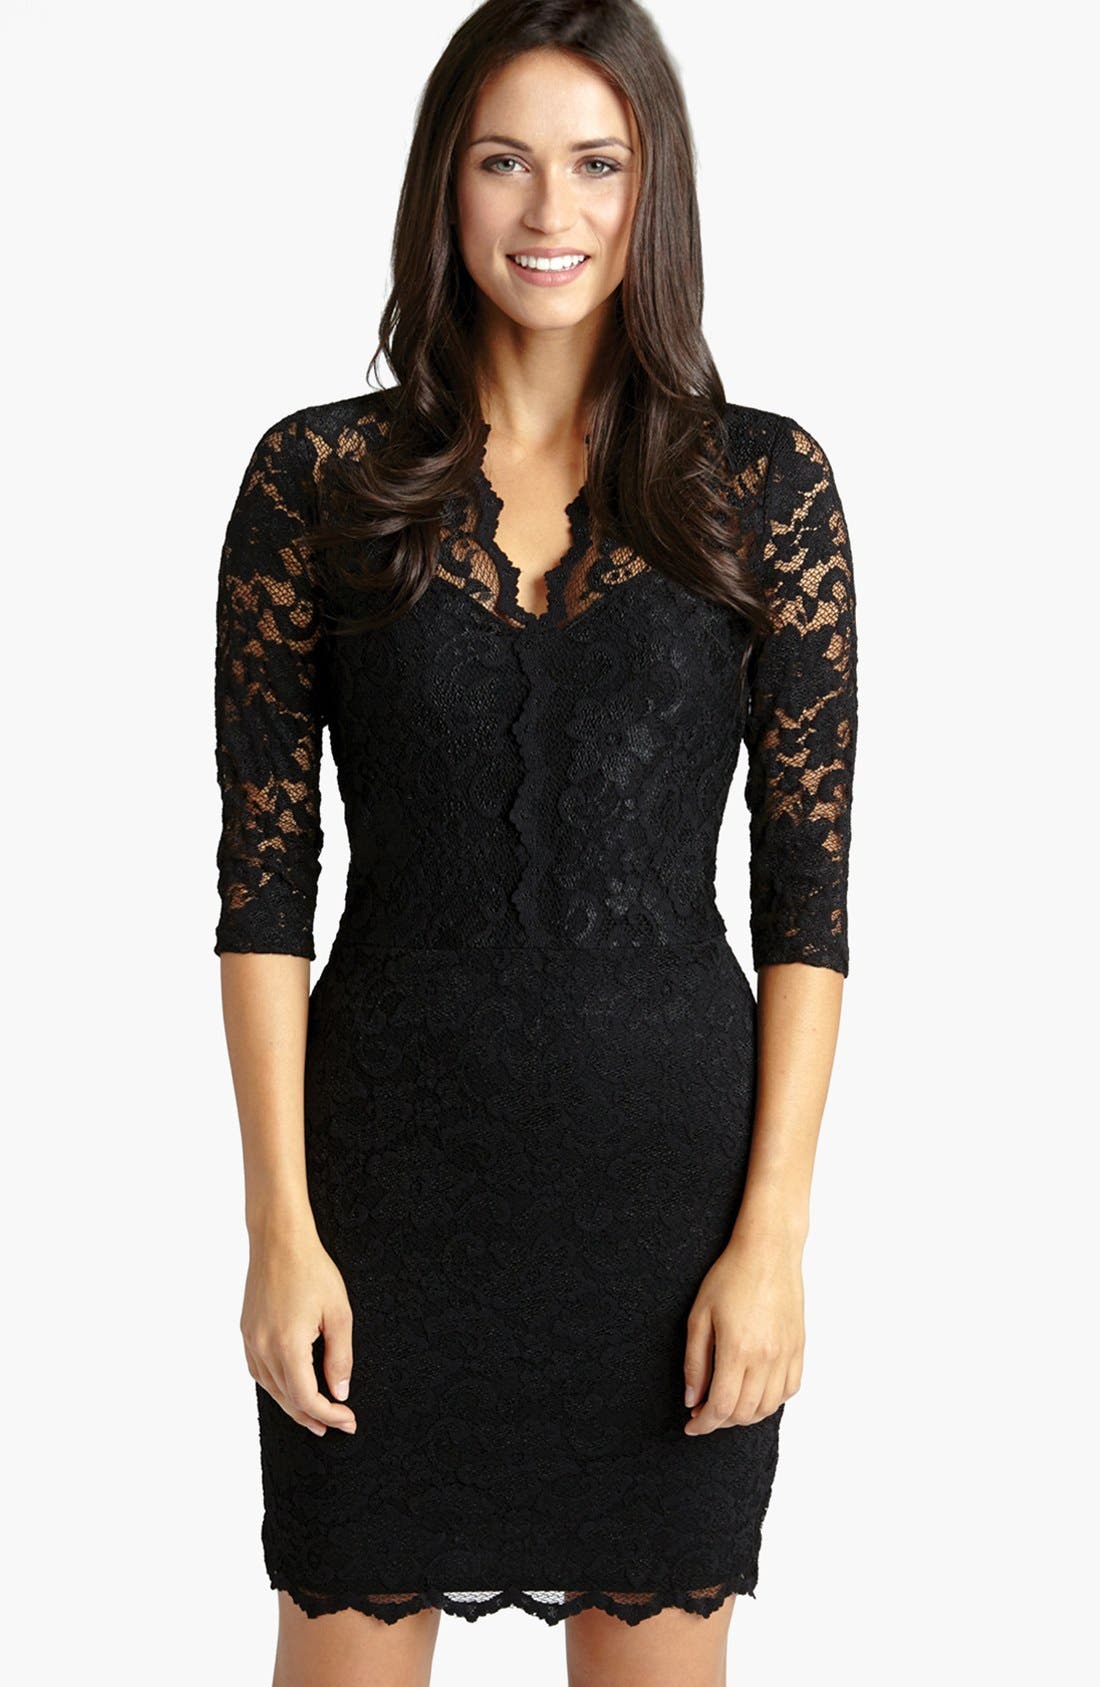 Nordstrom Women Clothing Dresses Party Dresses Lace Body-Con Cockail Dress in Black at Nordstrom 